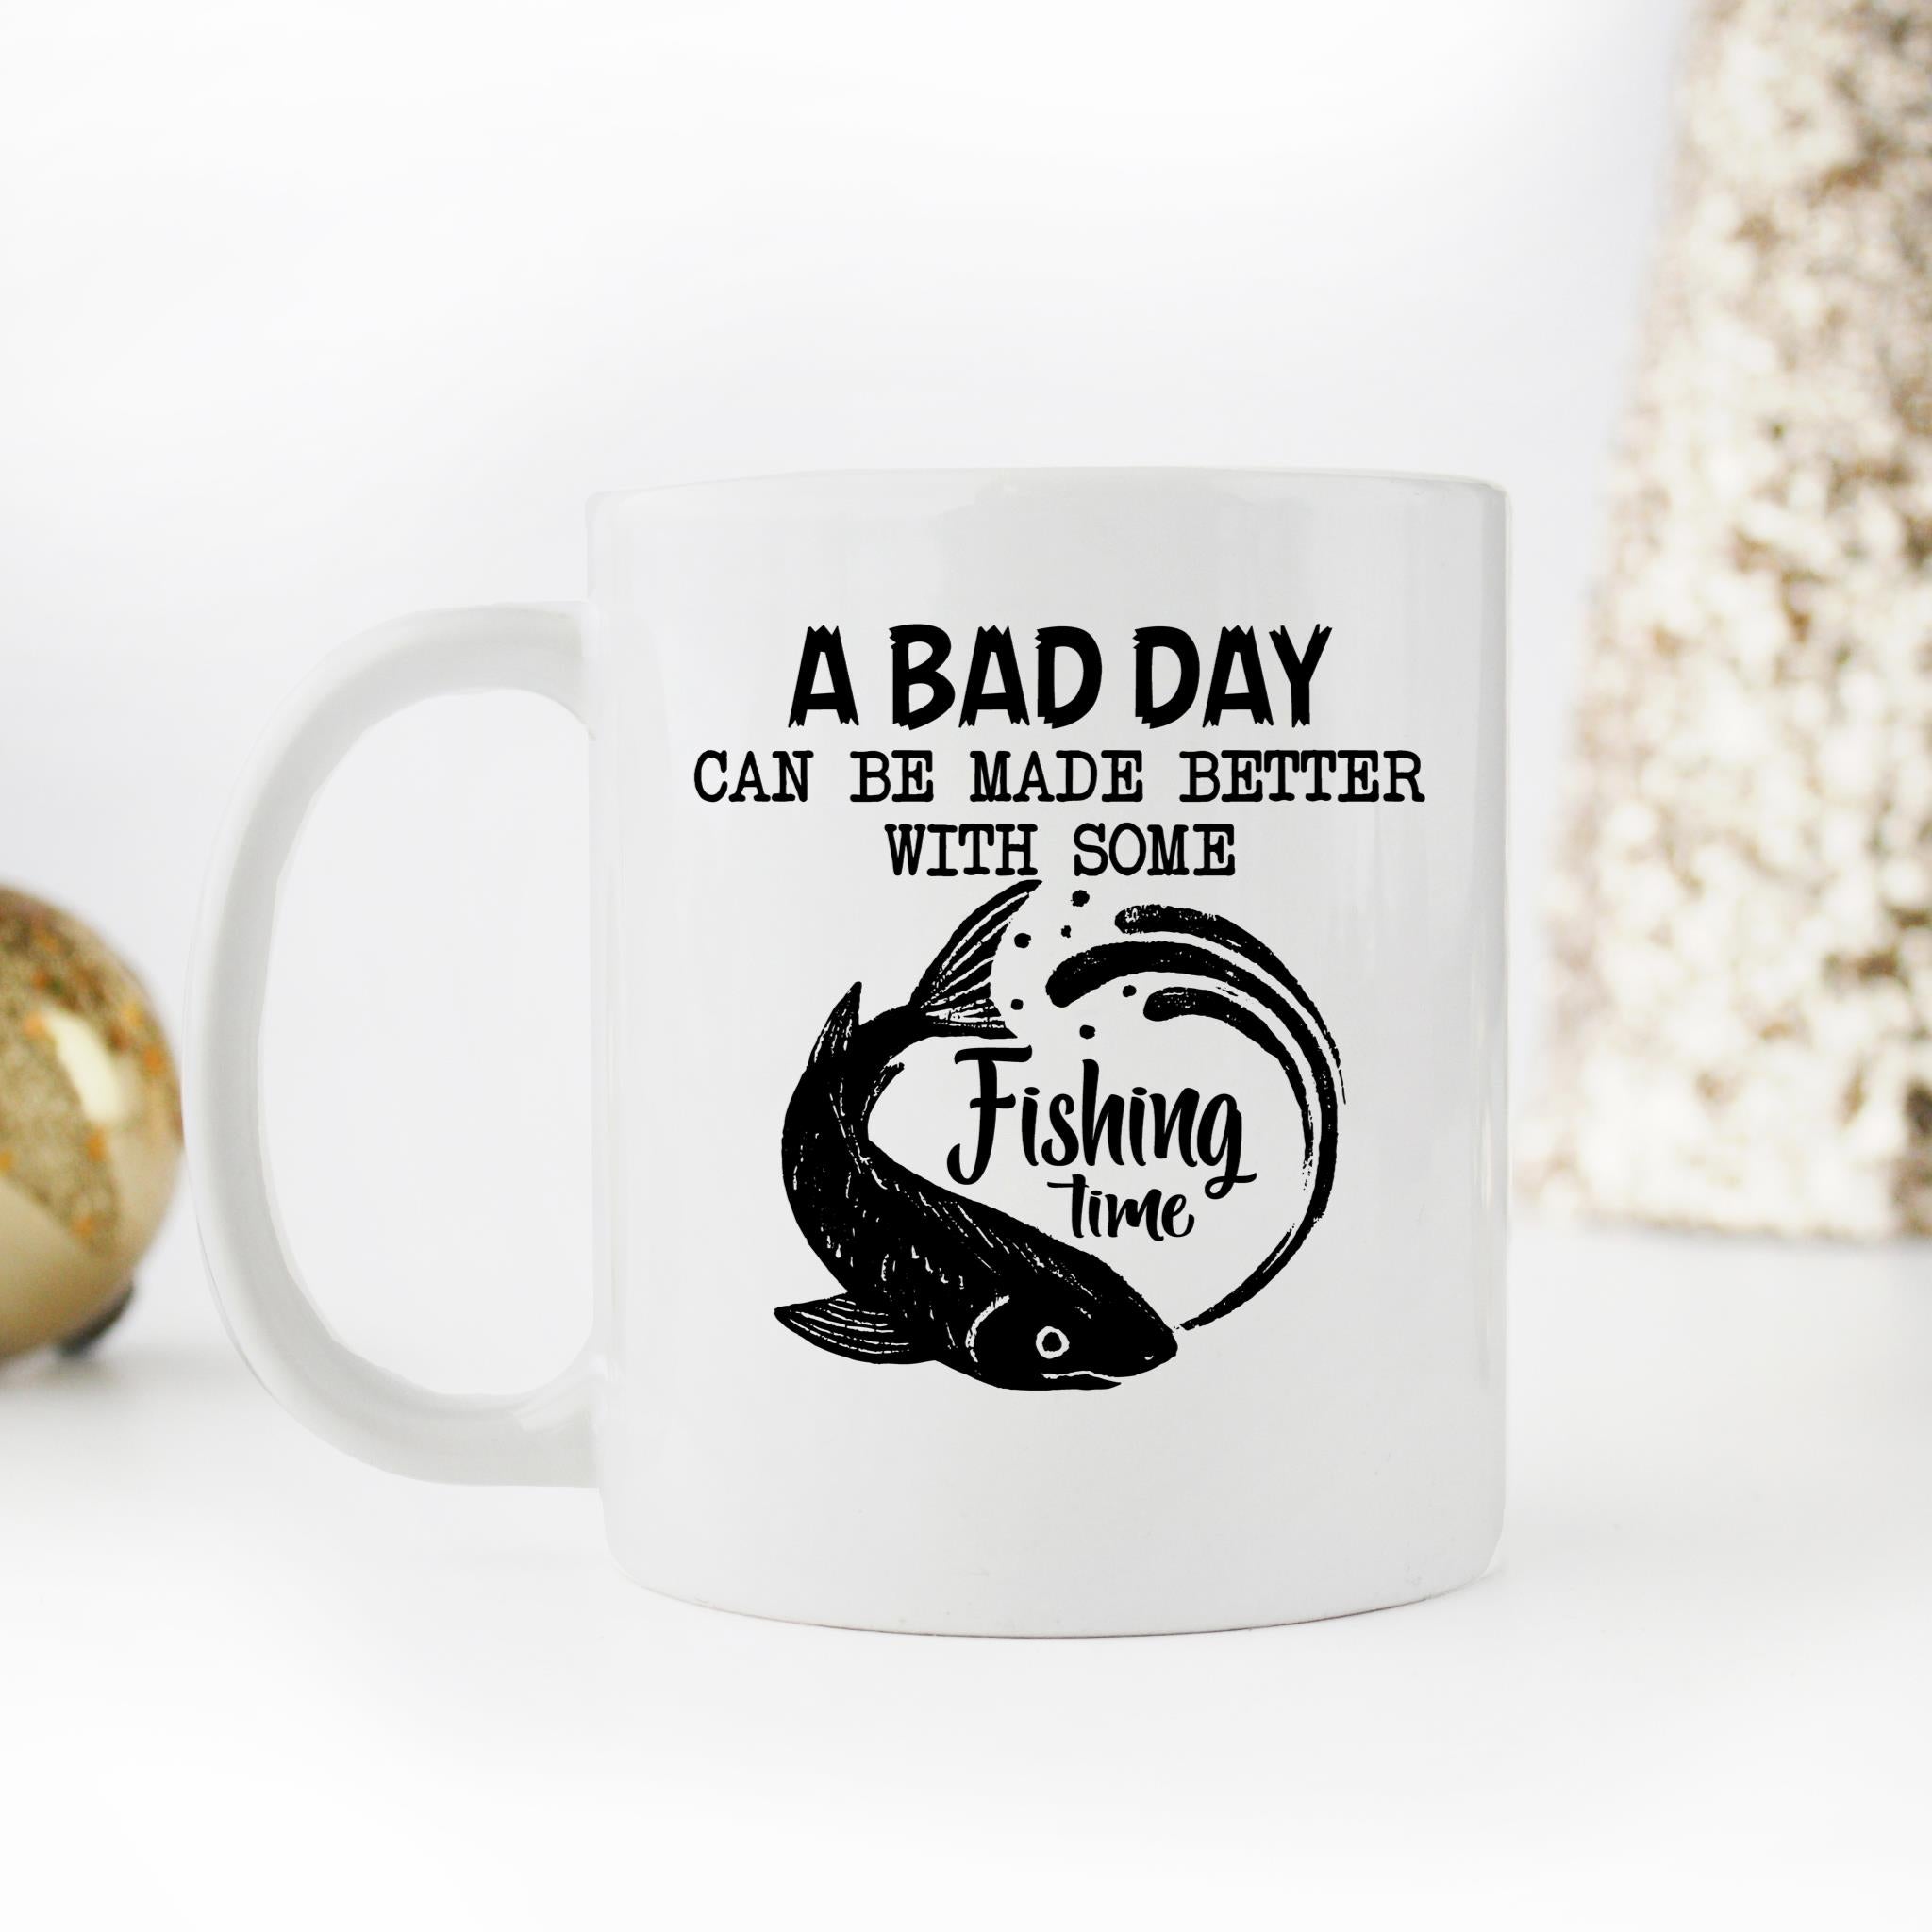 Skitongifts Funny Ceramic Novelty Coffee Mug Copy Of B0967nt9yy-A Bad Day Can Be Made Better With Some Fishing Time 3CwDIaV